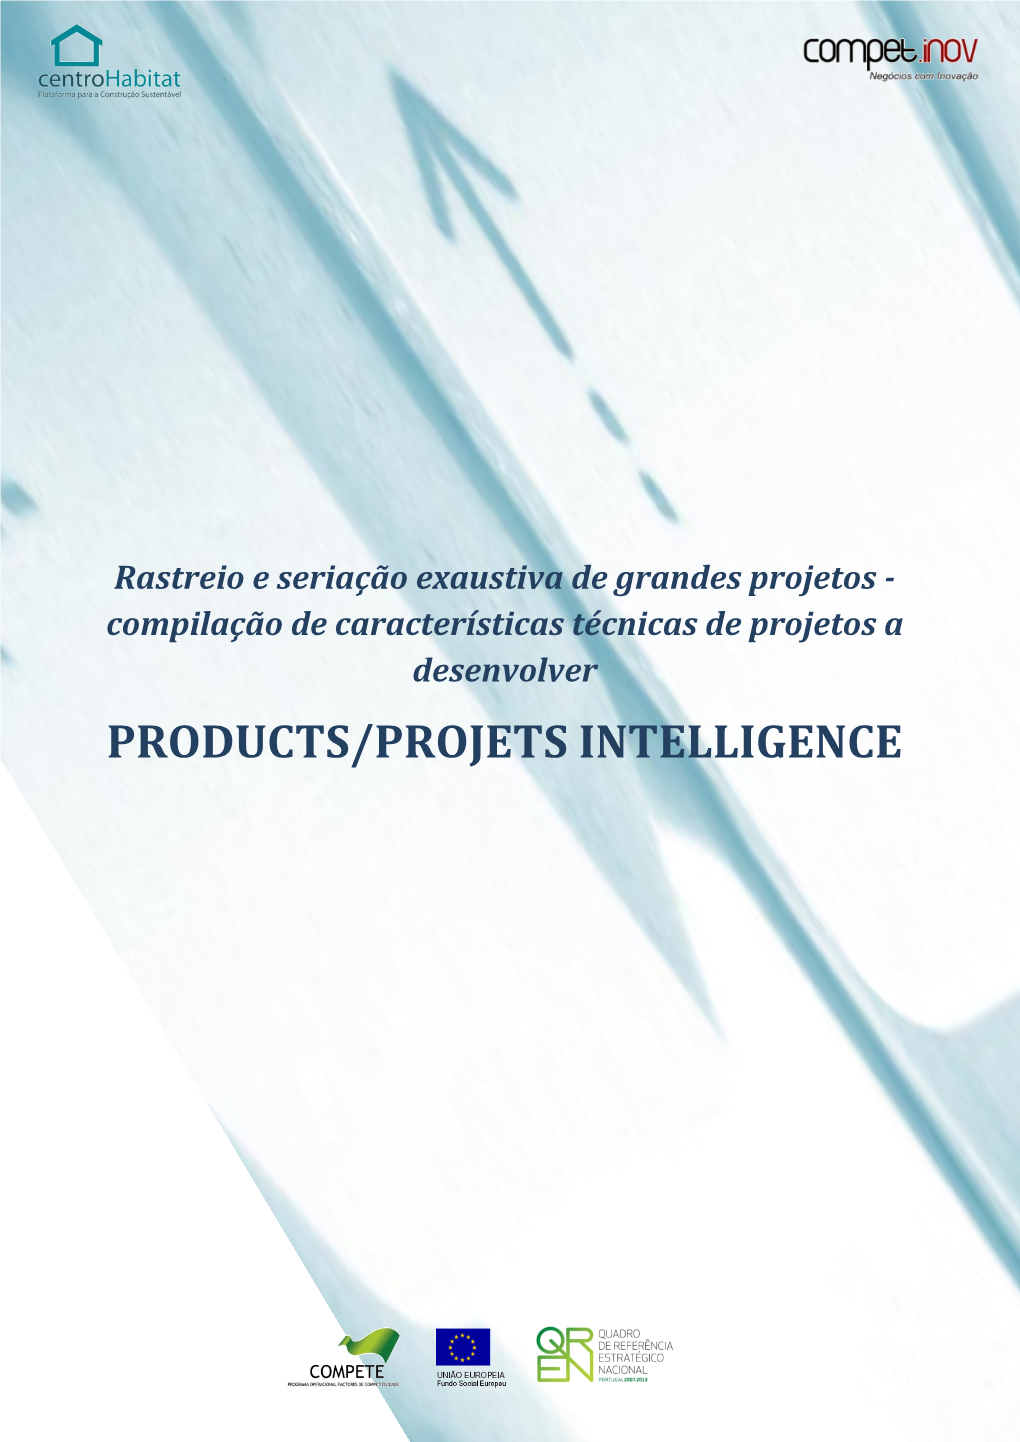 Products/Projets Intelligence